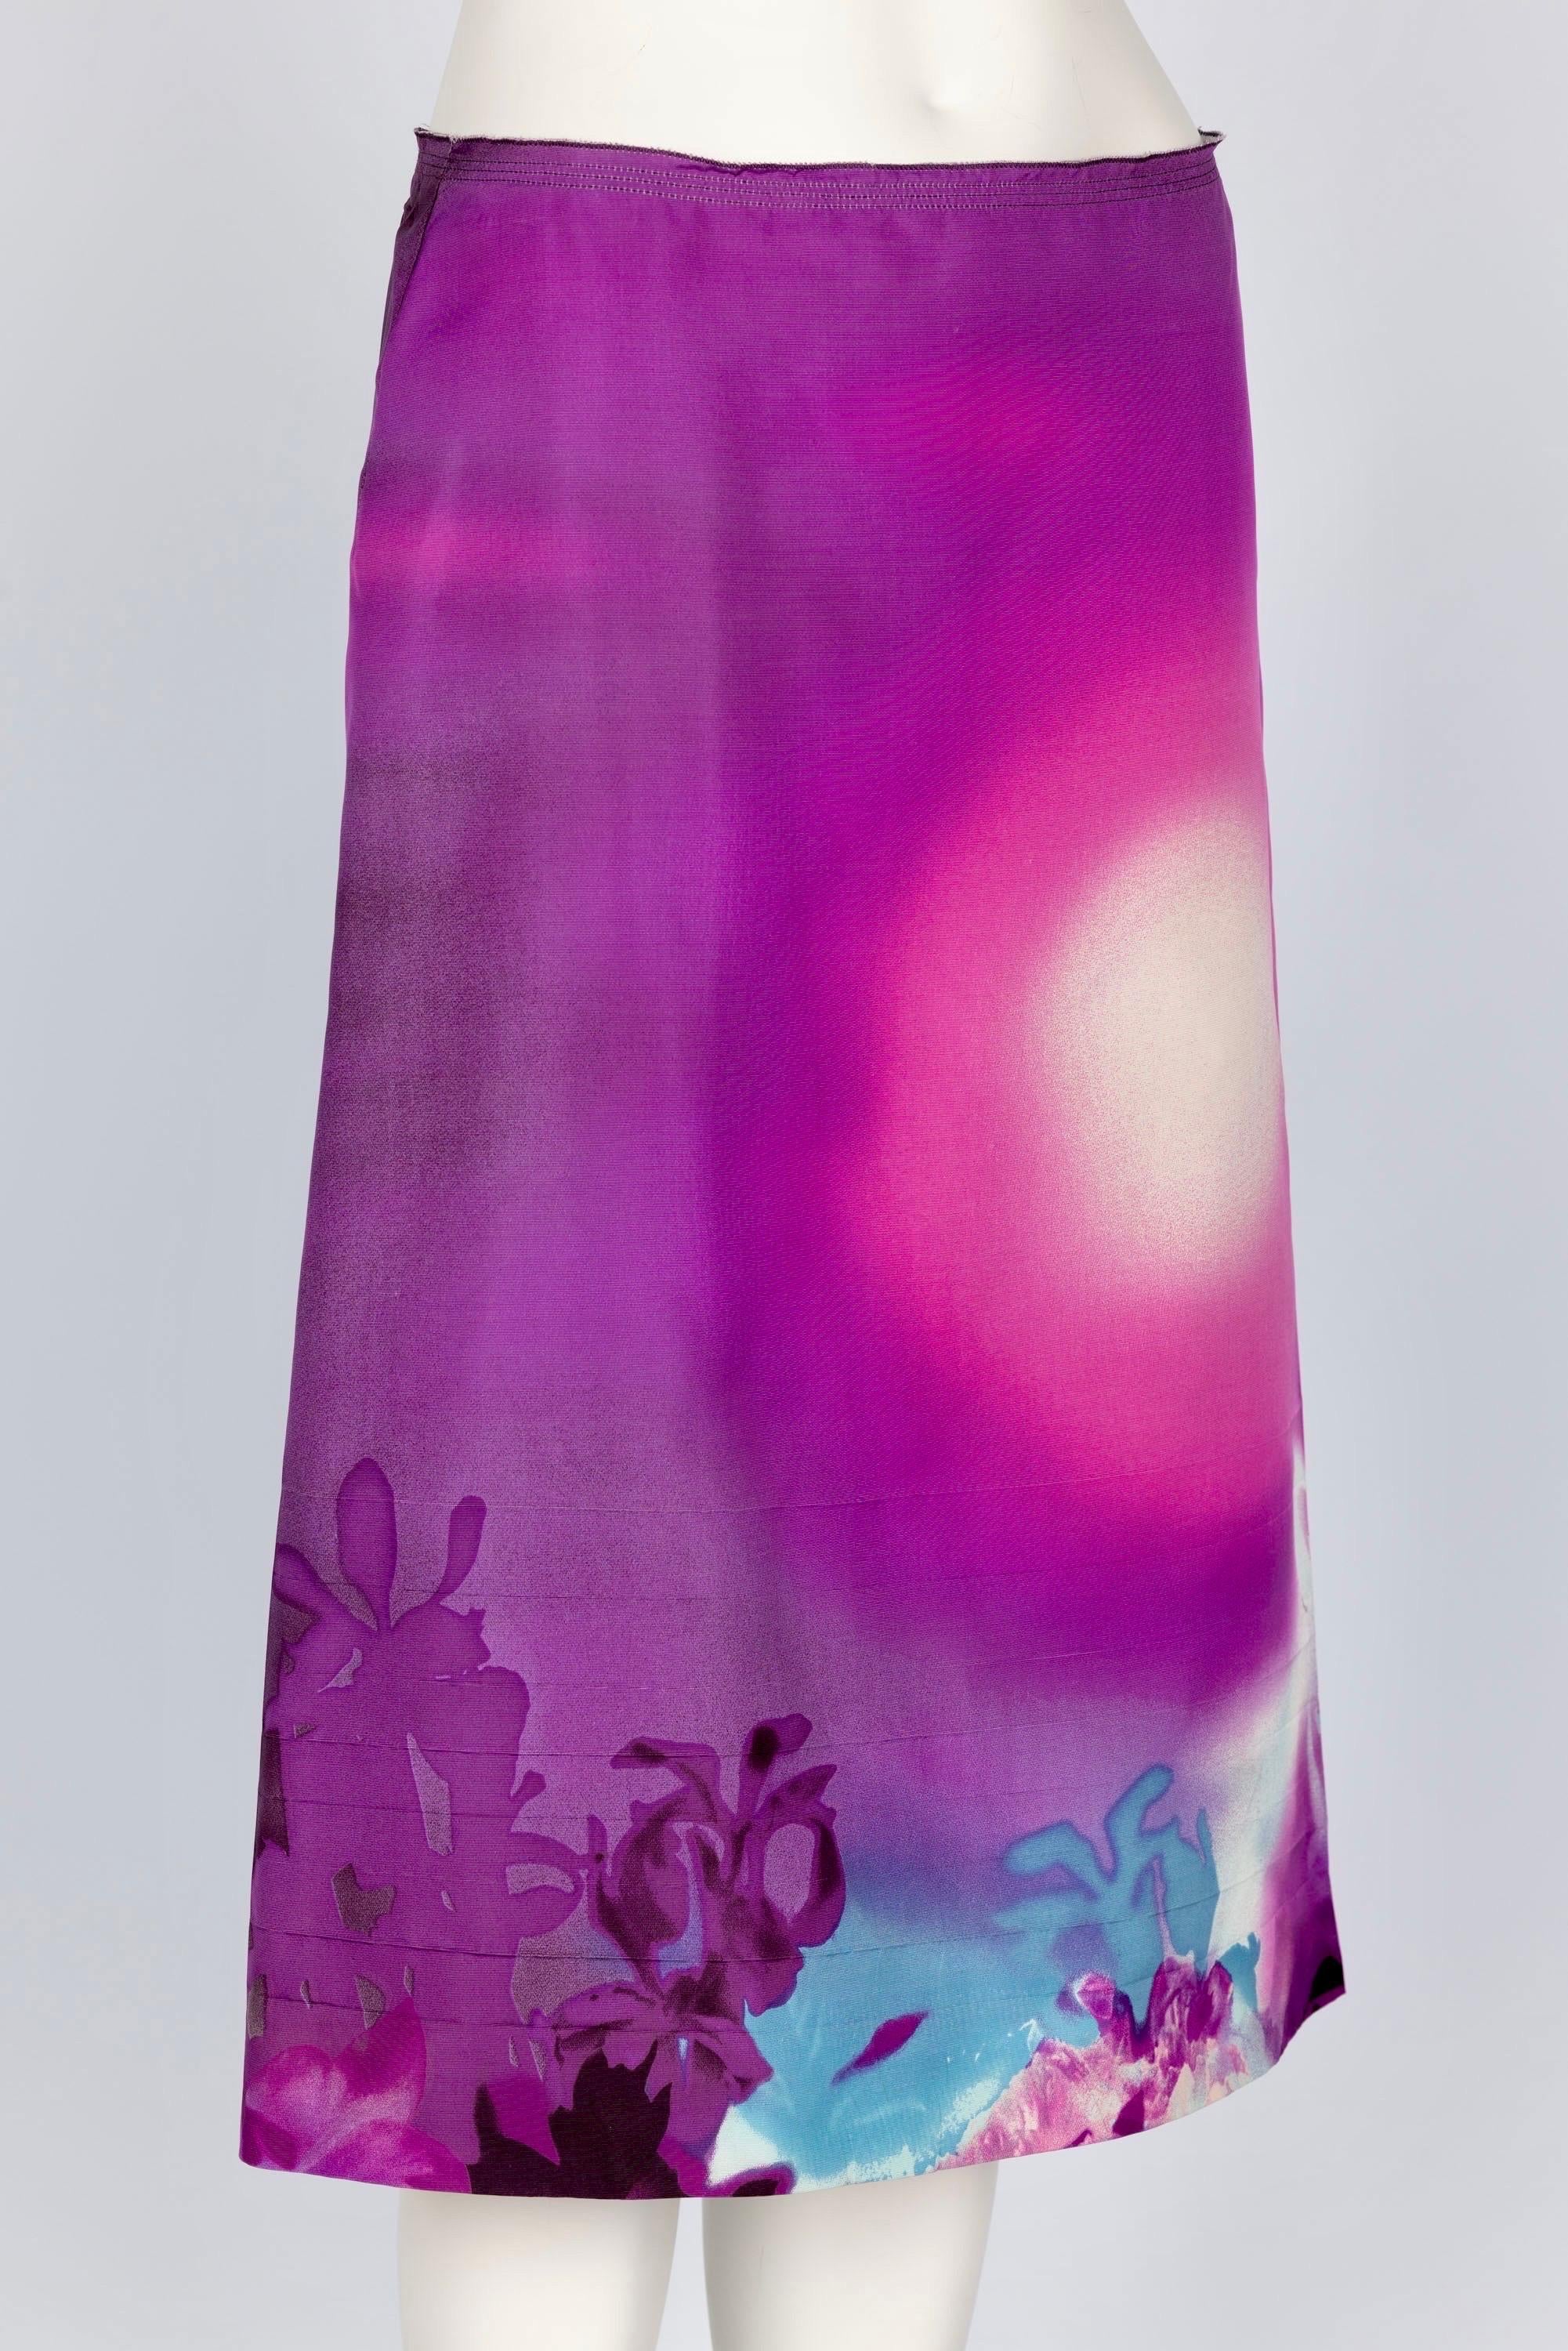 Purple Pink Ombre Scenic Print Fall 2004 Prada Runway Skirt In Excellent Condition For Sale In Boca Raton, FL